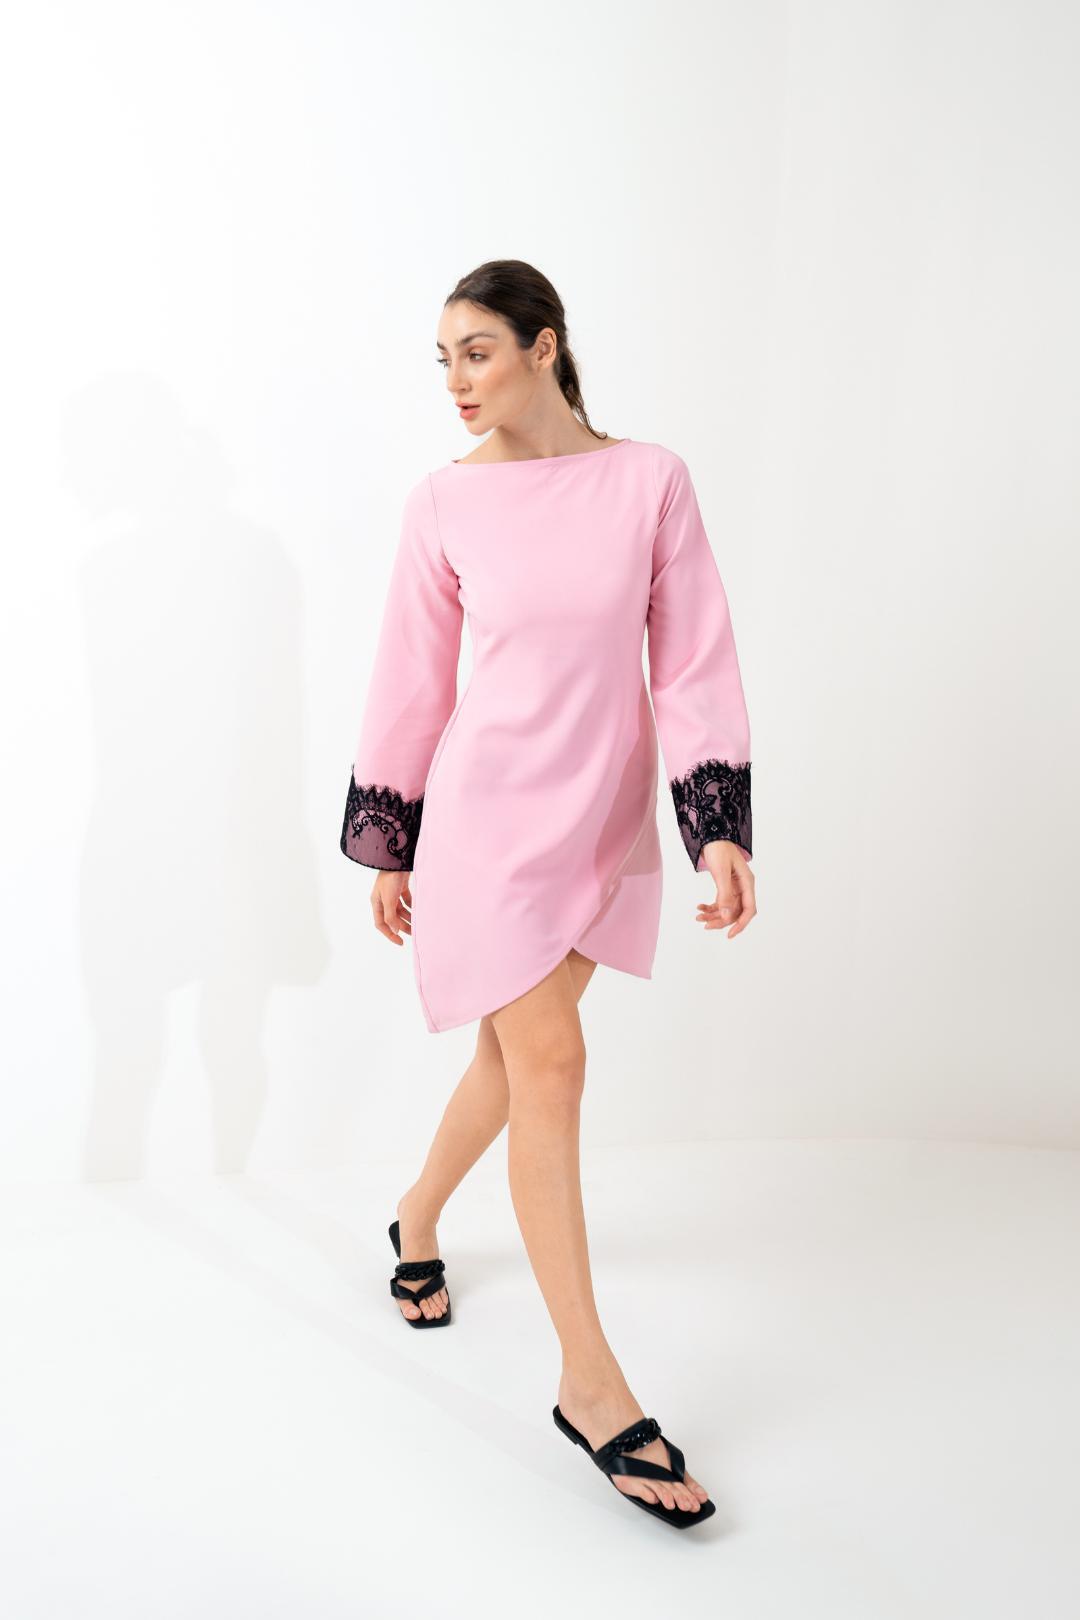 PINK ASSYMETRICAL DRESS WITH LACE DETAIL - Sotbella